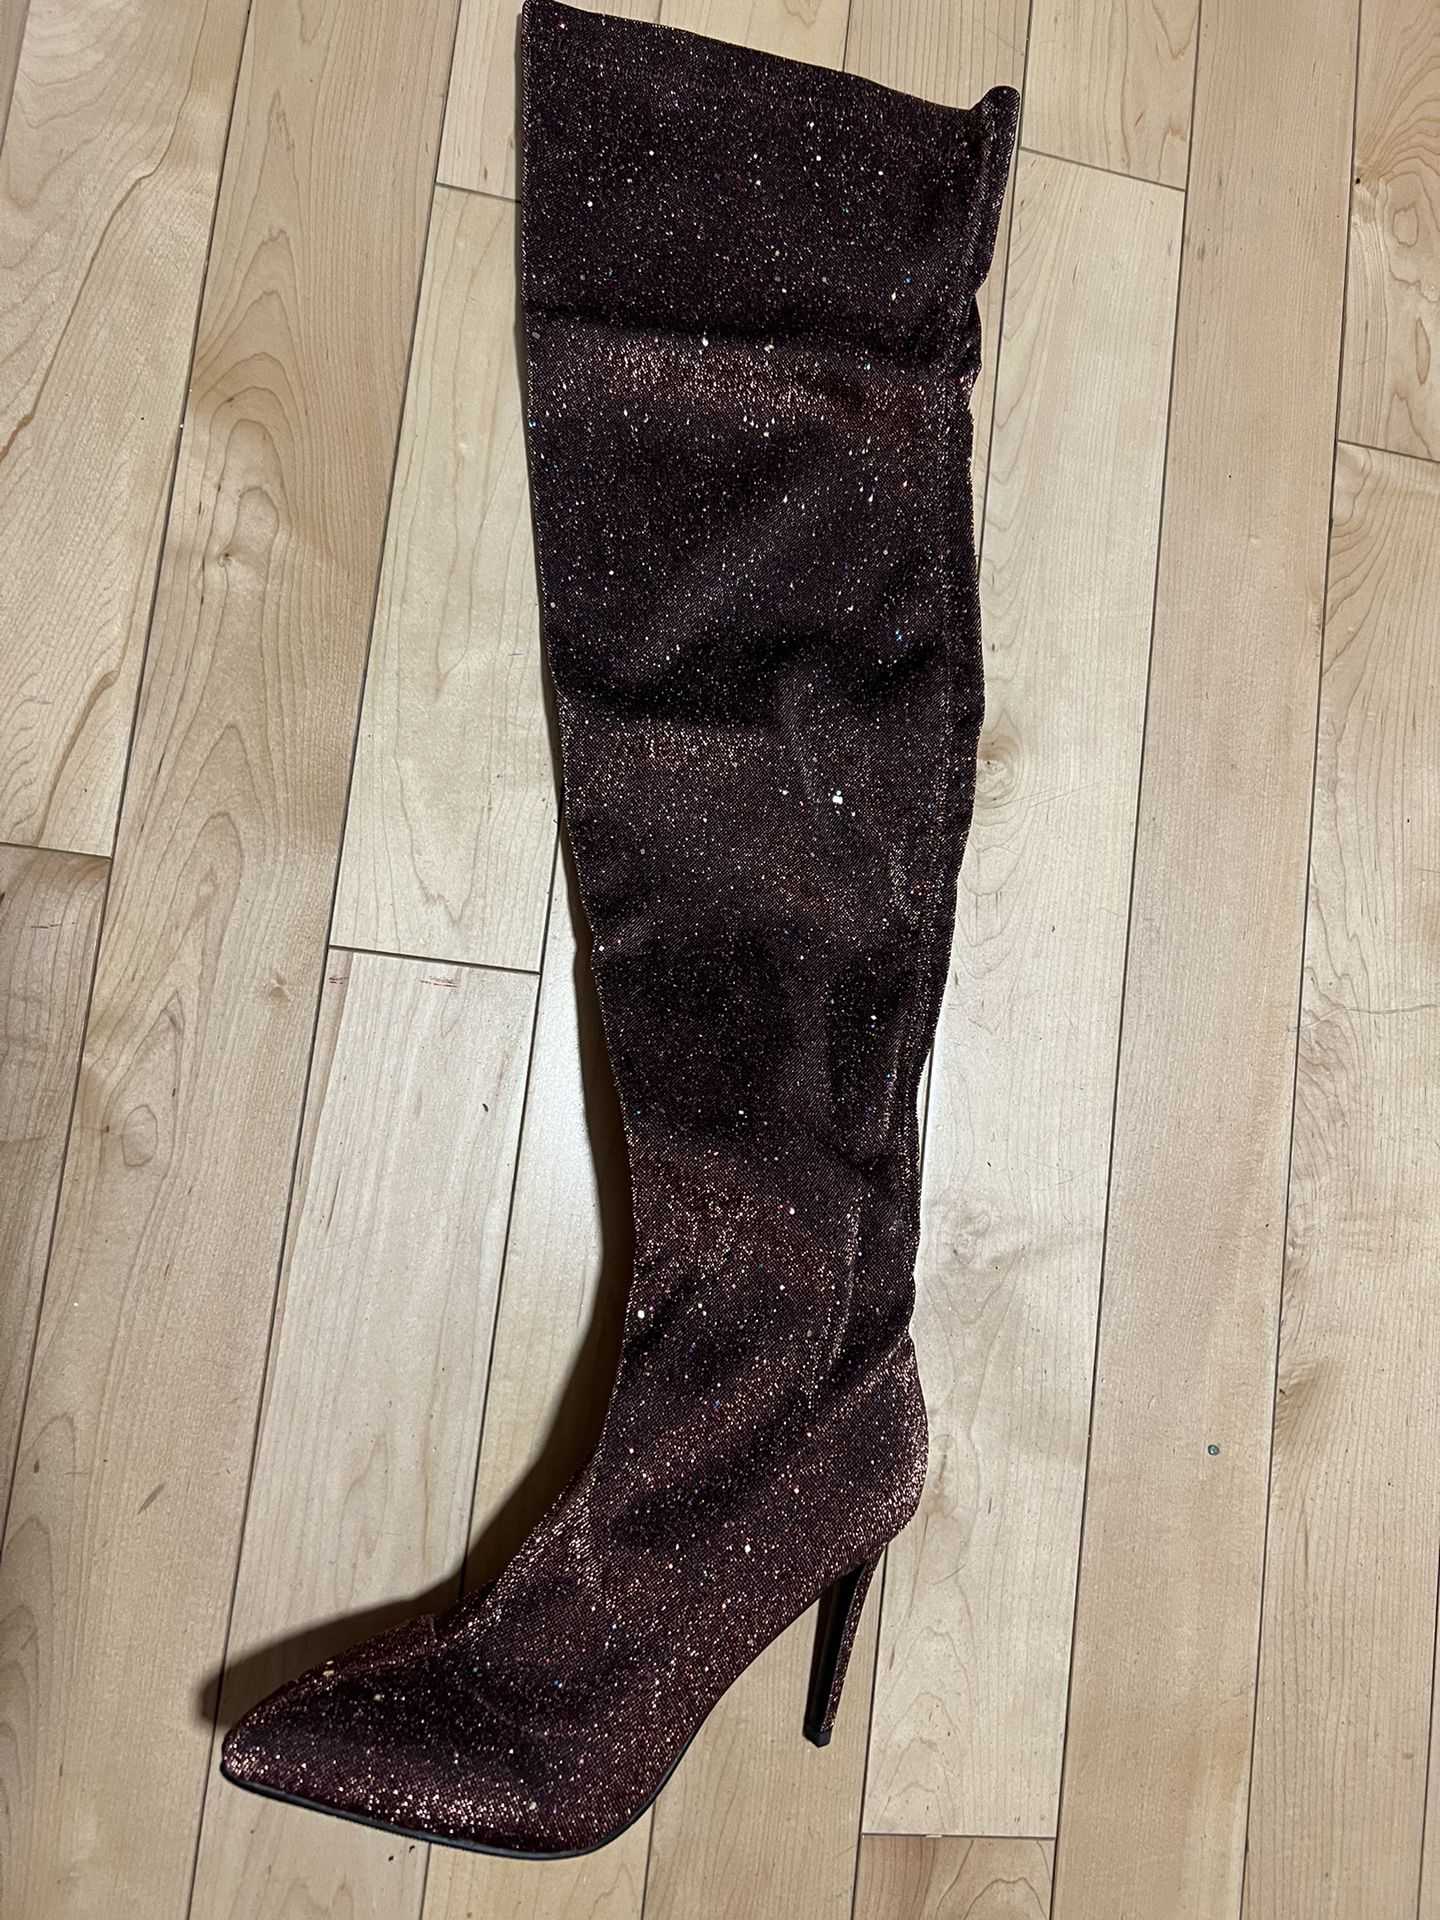 Louis Vuitton skyline thigh boots (Size 38) 7.5-8 for Sale in Inglewood, CA  - OfferUp